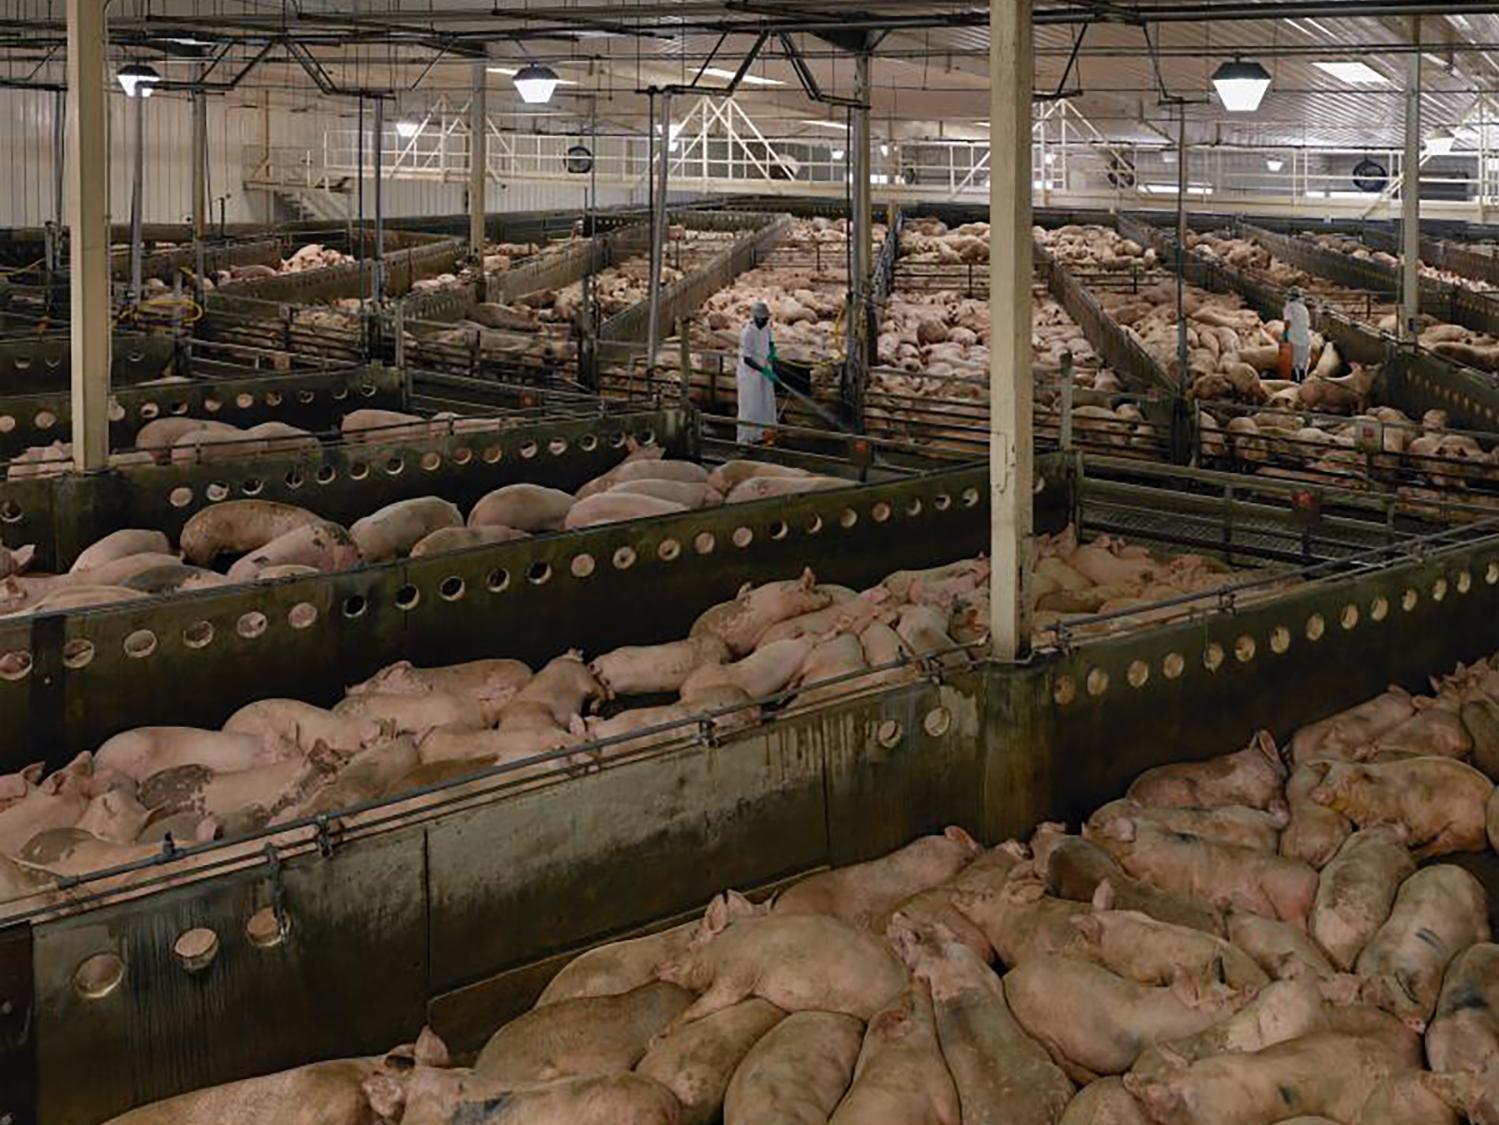 "Off-Animals: Exhausted Capitalism and the Last Remains of Hog Killing in Chicago"